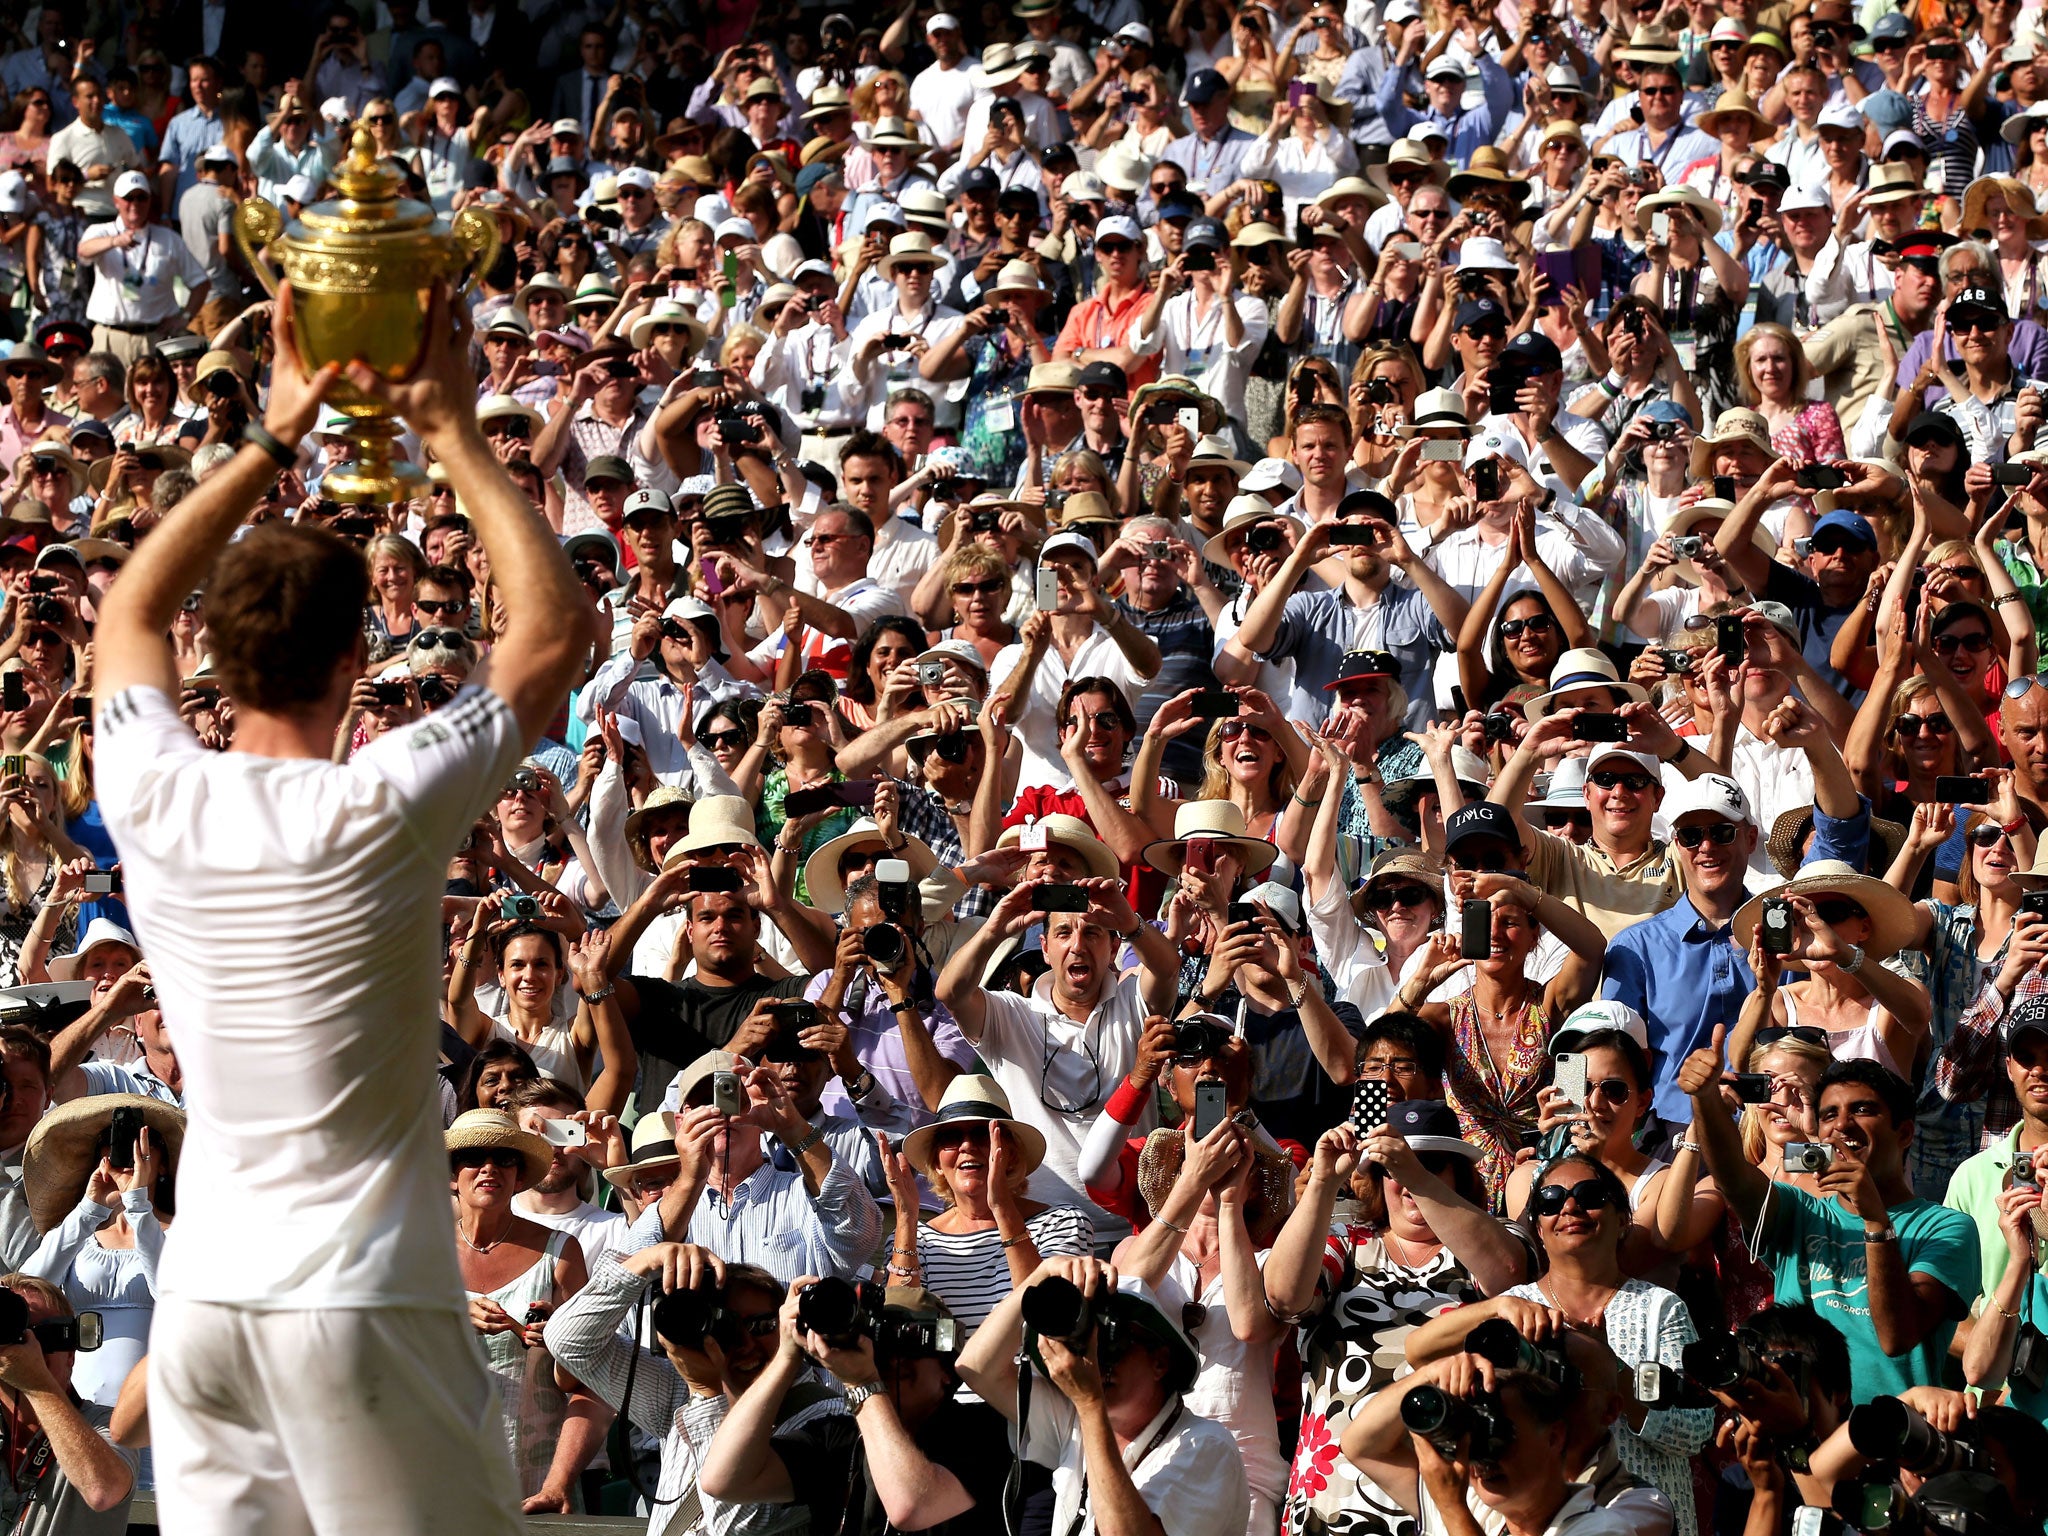 Andy Murray takes the applause from the Centre Court crowd after his victory over Novak Djokovic in the final